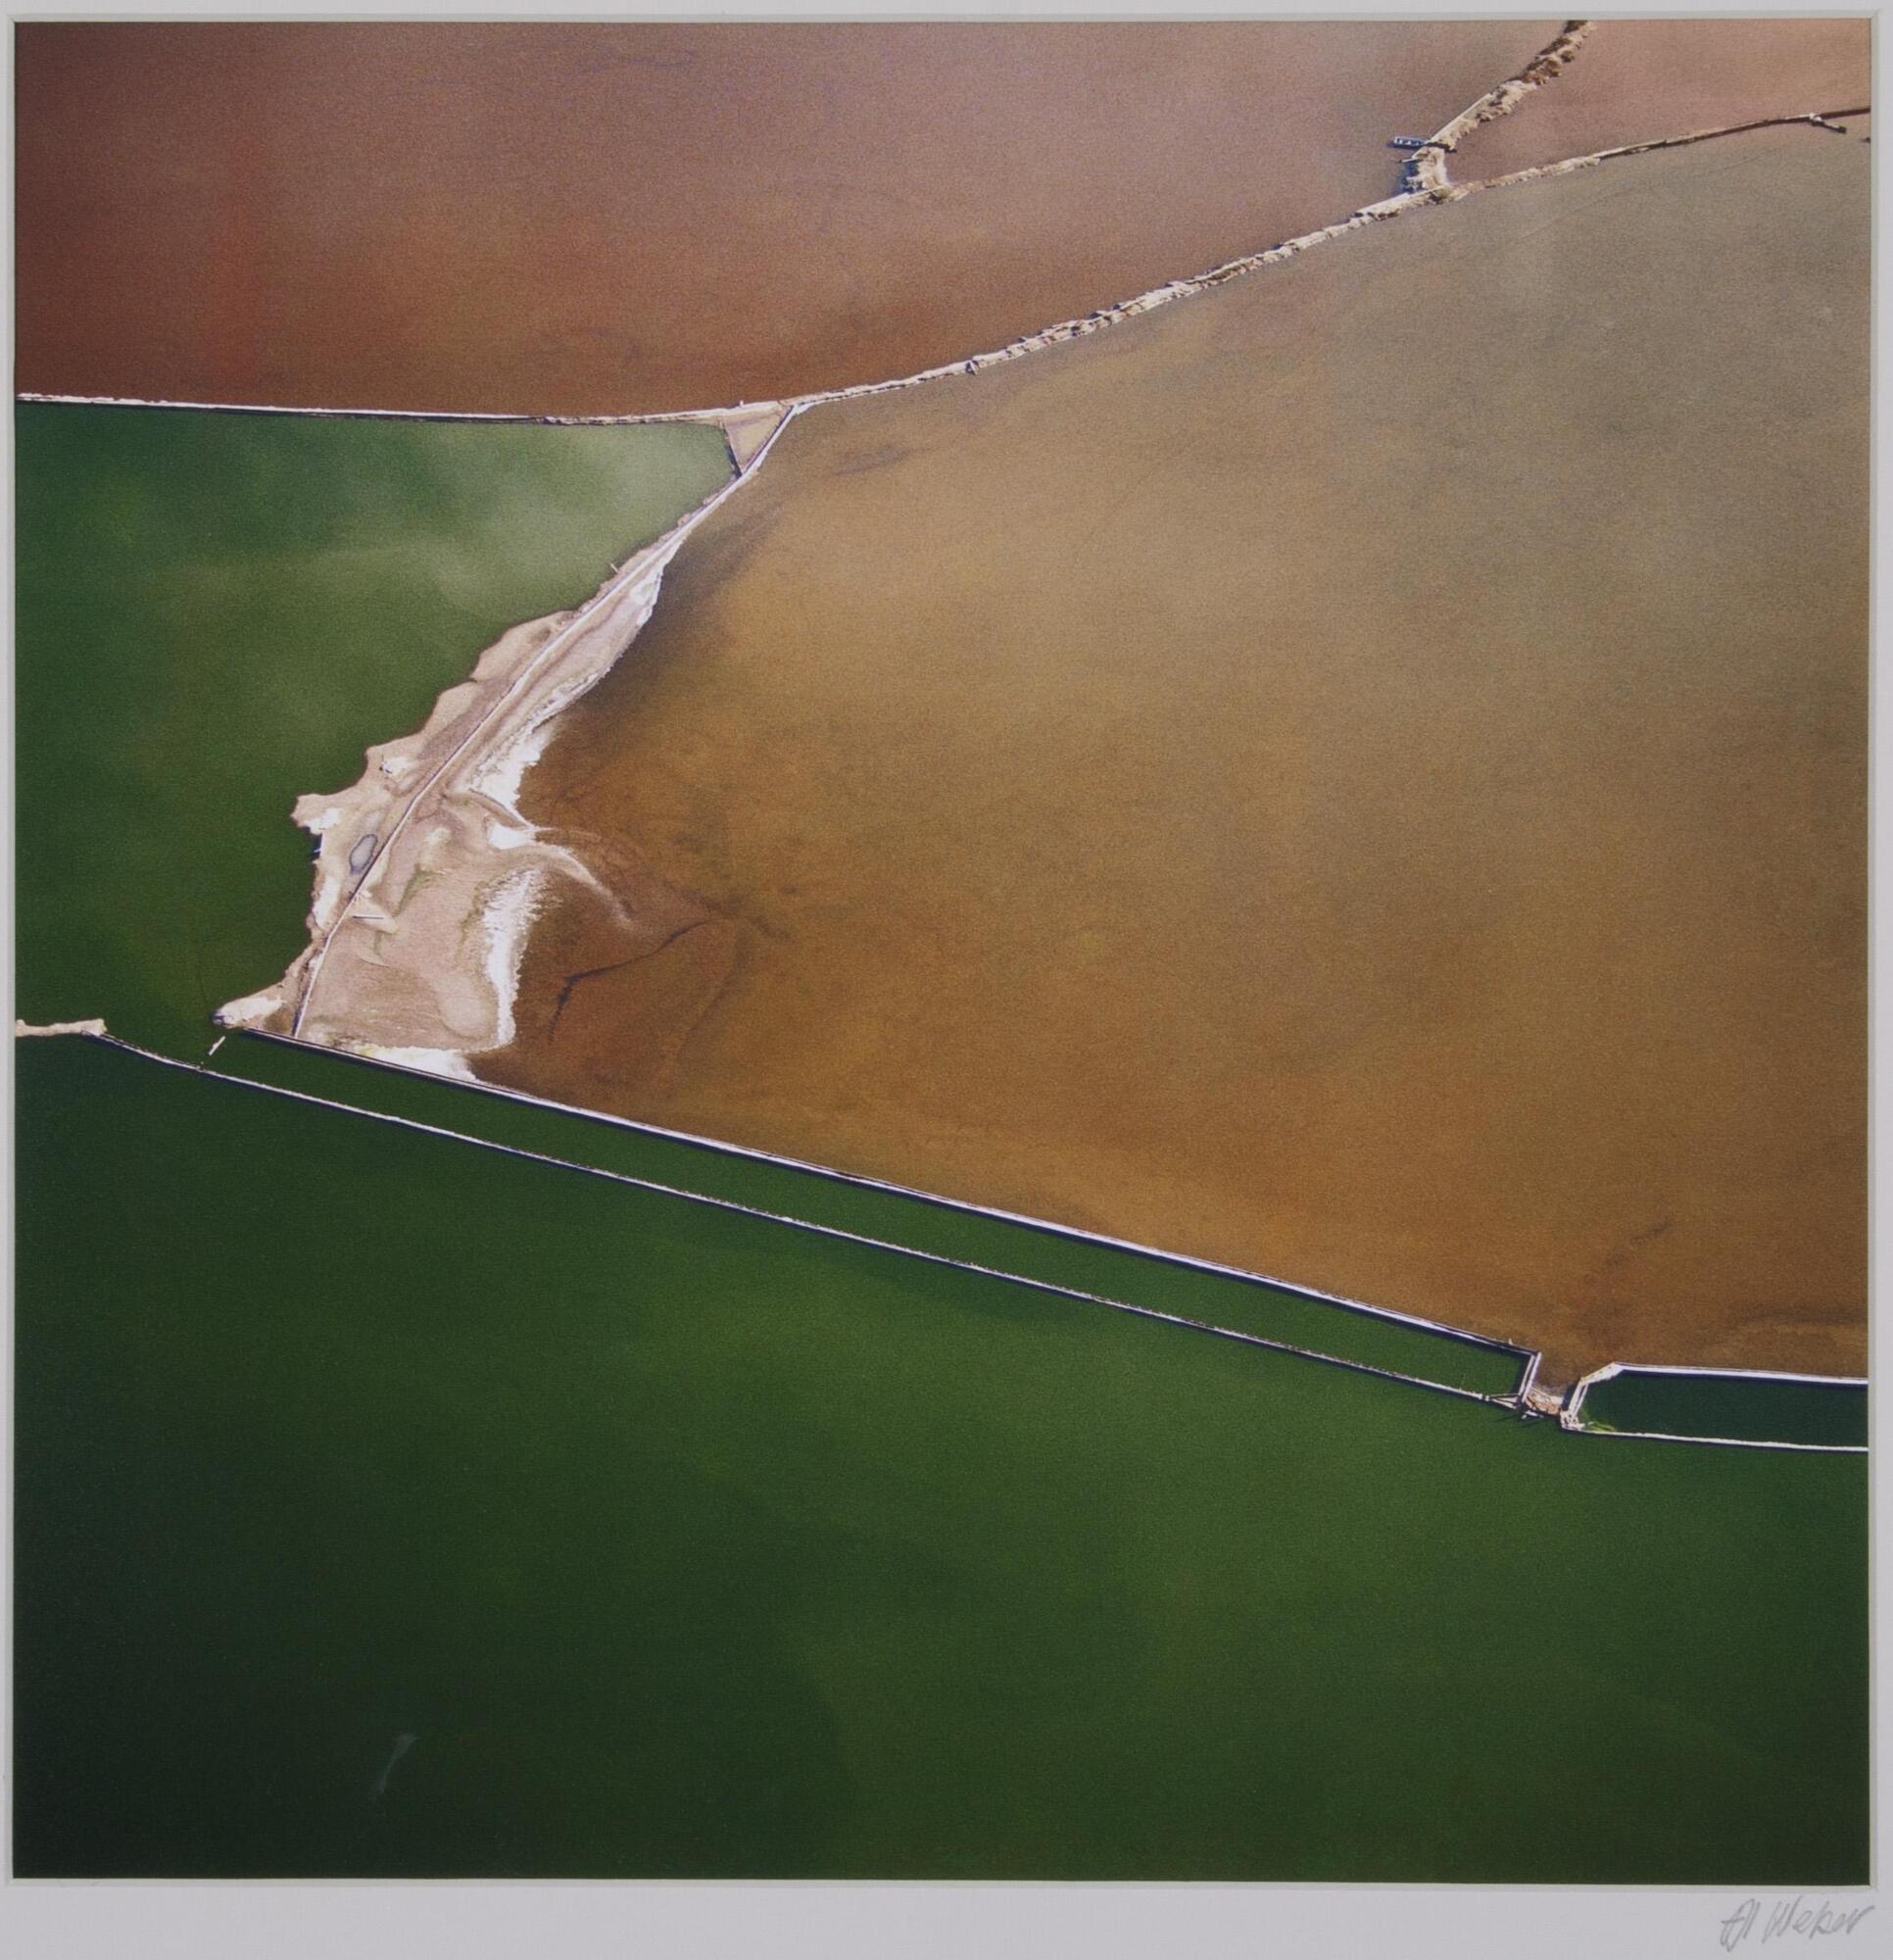 An aerial view of land meeting water. The water is a deep emerald green and the land, a varying shade of ochre and brown. The lower section is the water and there is a boat dock on the lower right section of the image. The land mass is the upper portion of the image, but seems to be separated at one section in a horizontal format.